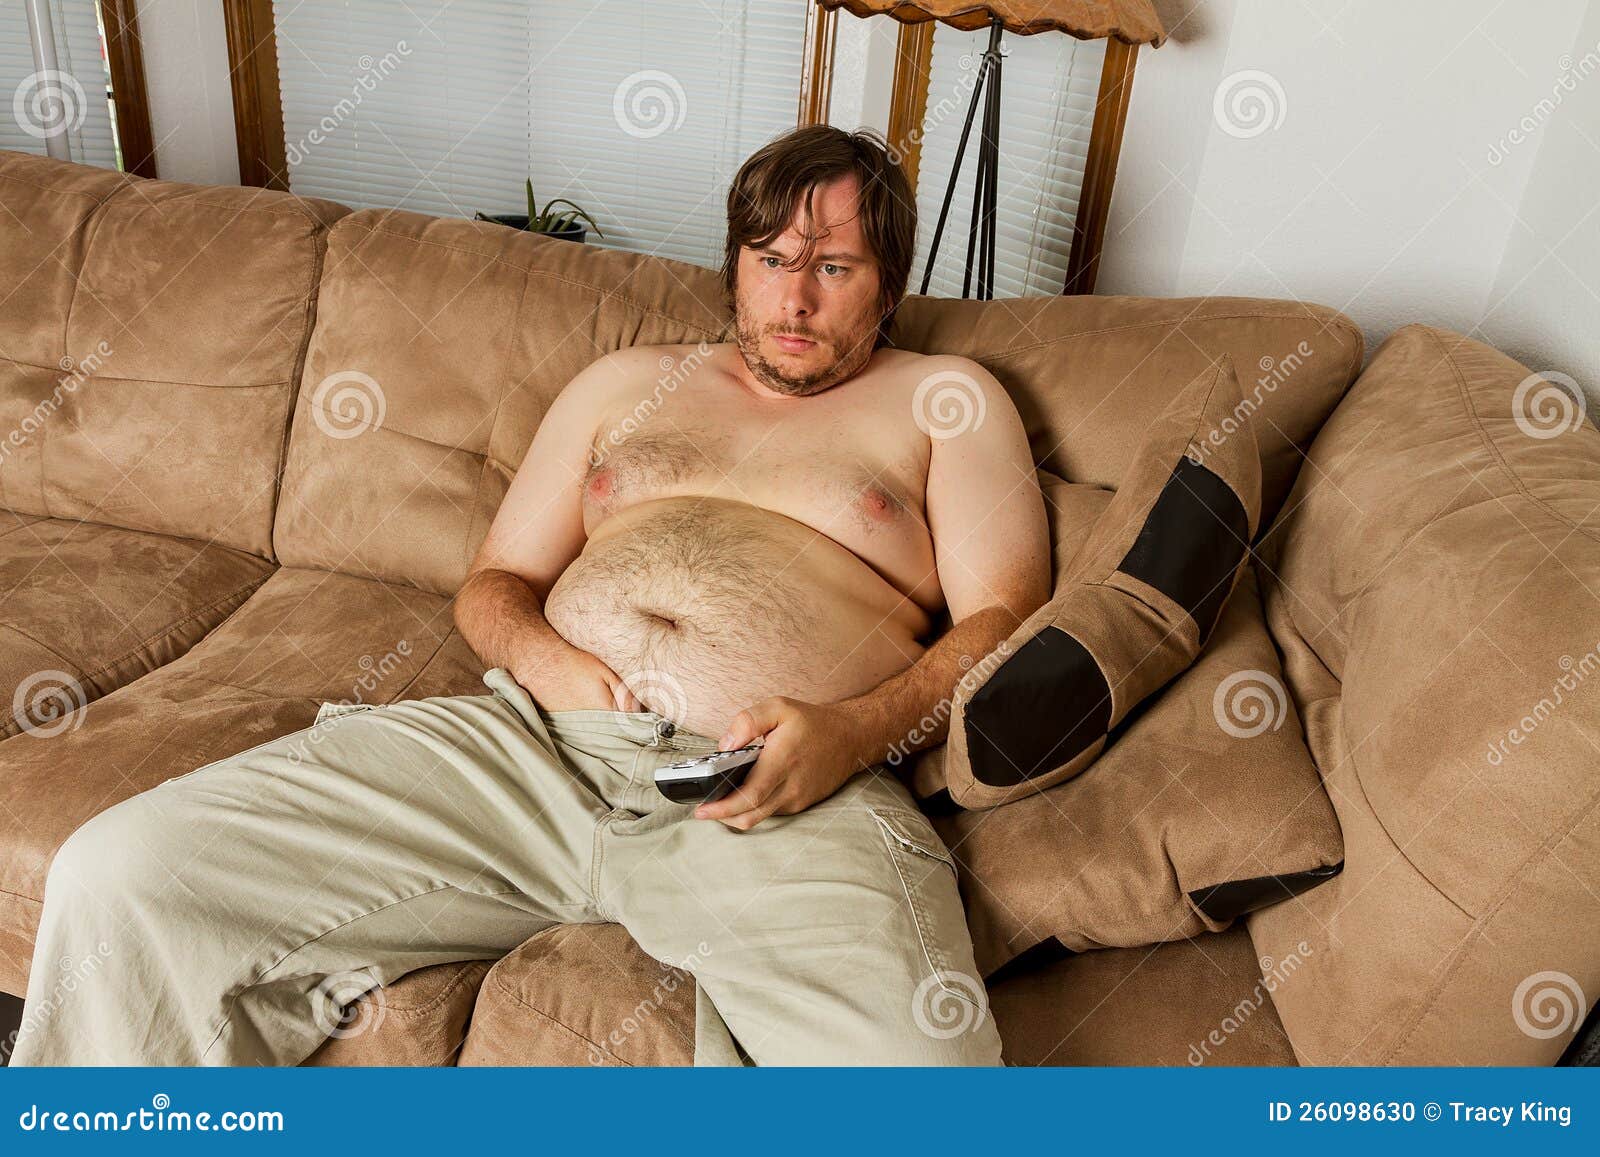 Fat Guy On Couch trimmed bush